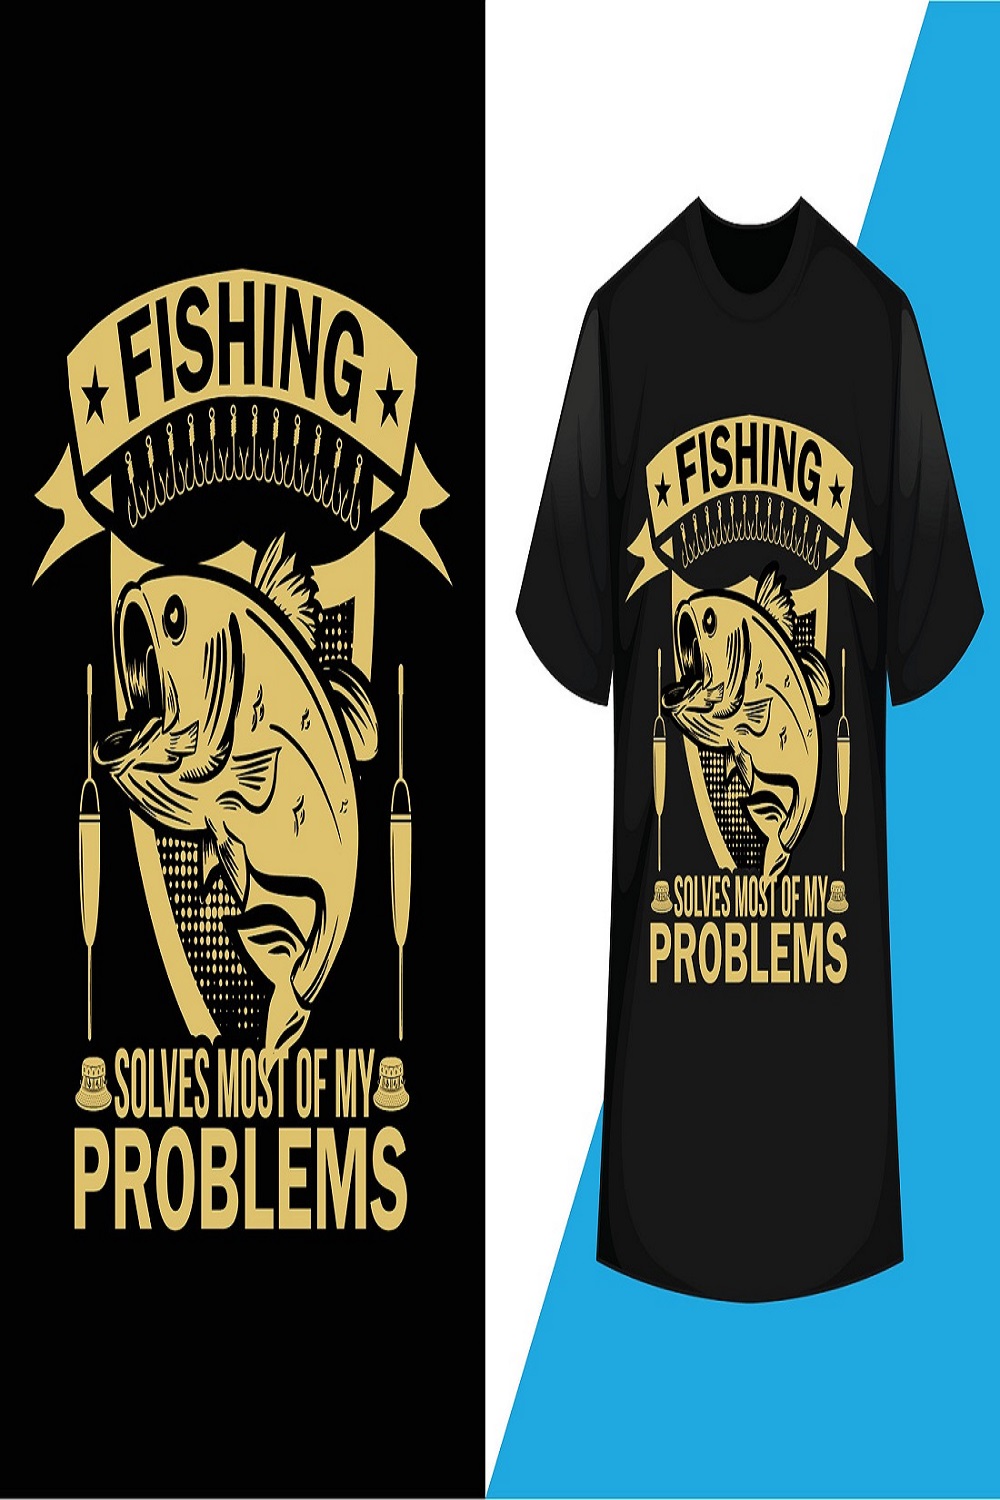 Fishing solves most of my problems fishing graphic pinterest preview image.